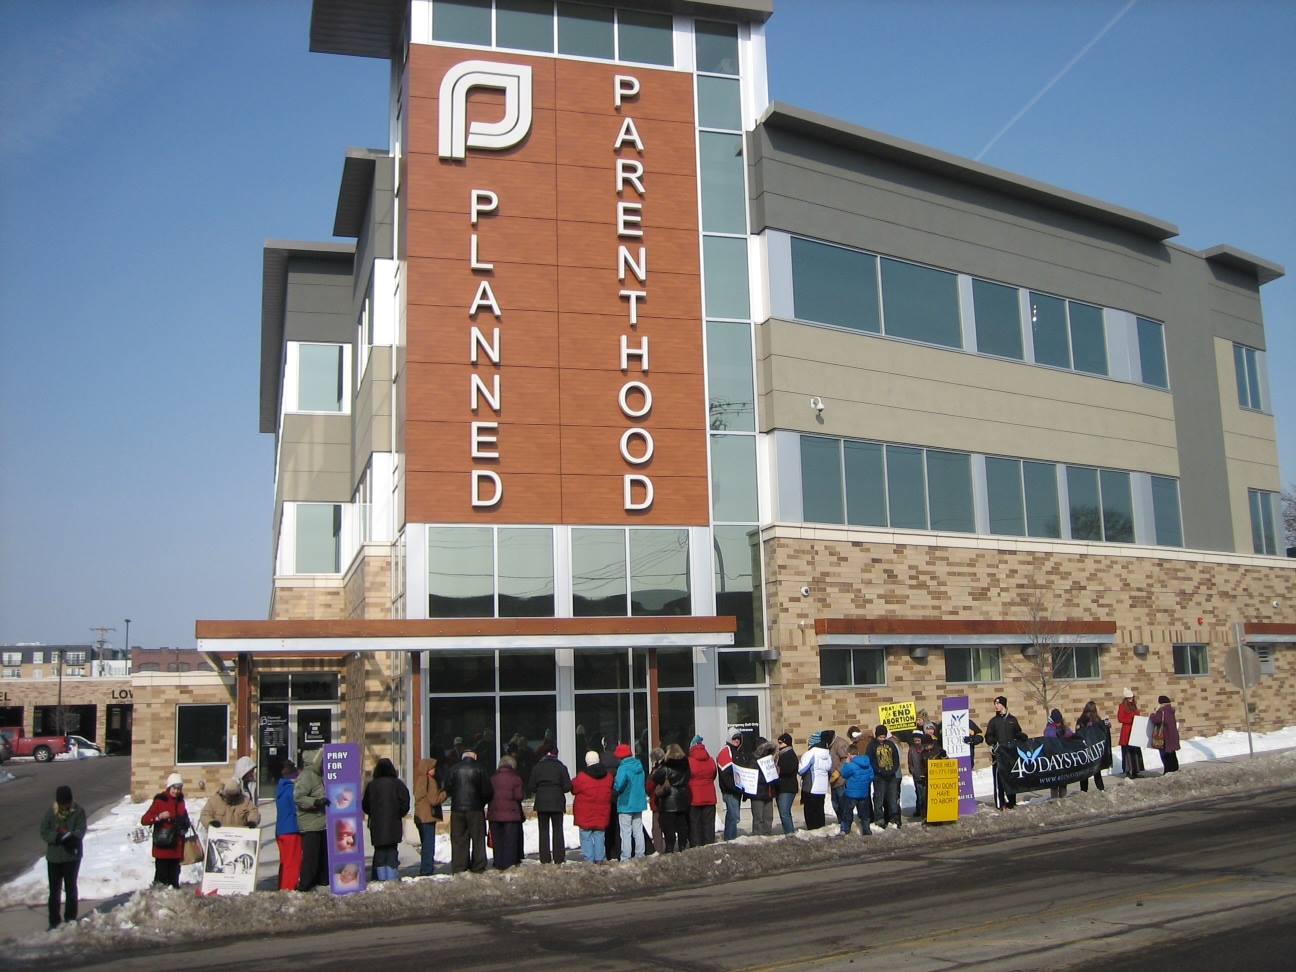 Plans to strip Planned Parenthood of federal funding could save hundreds of millions of dollars (and thousands of lives)